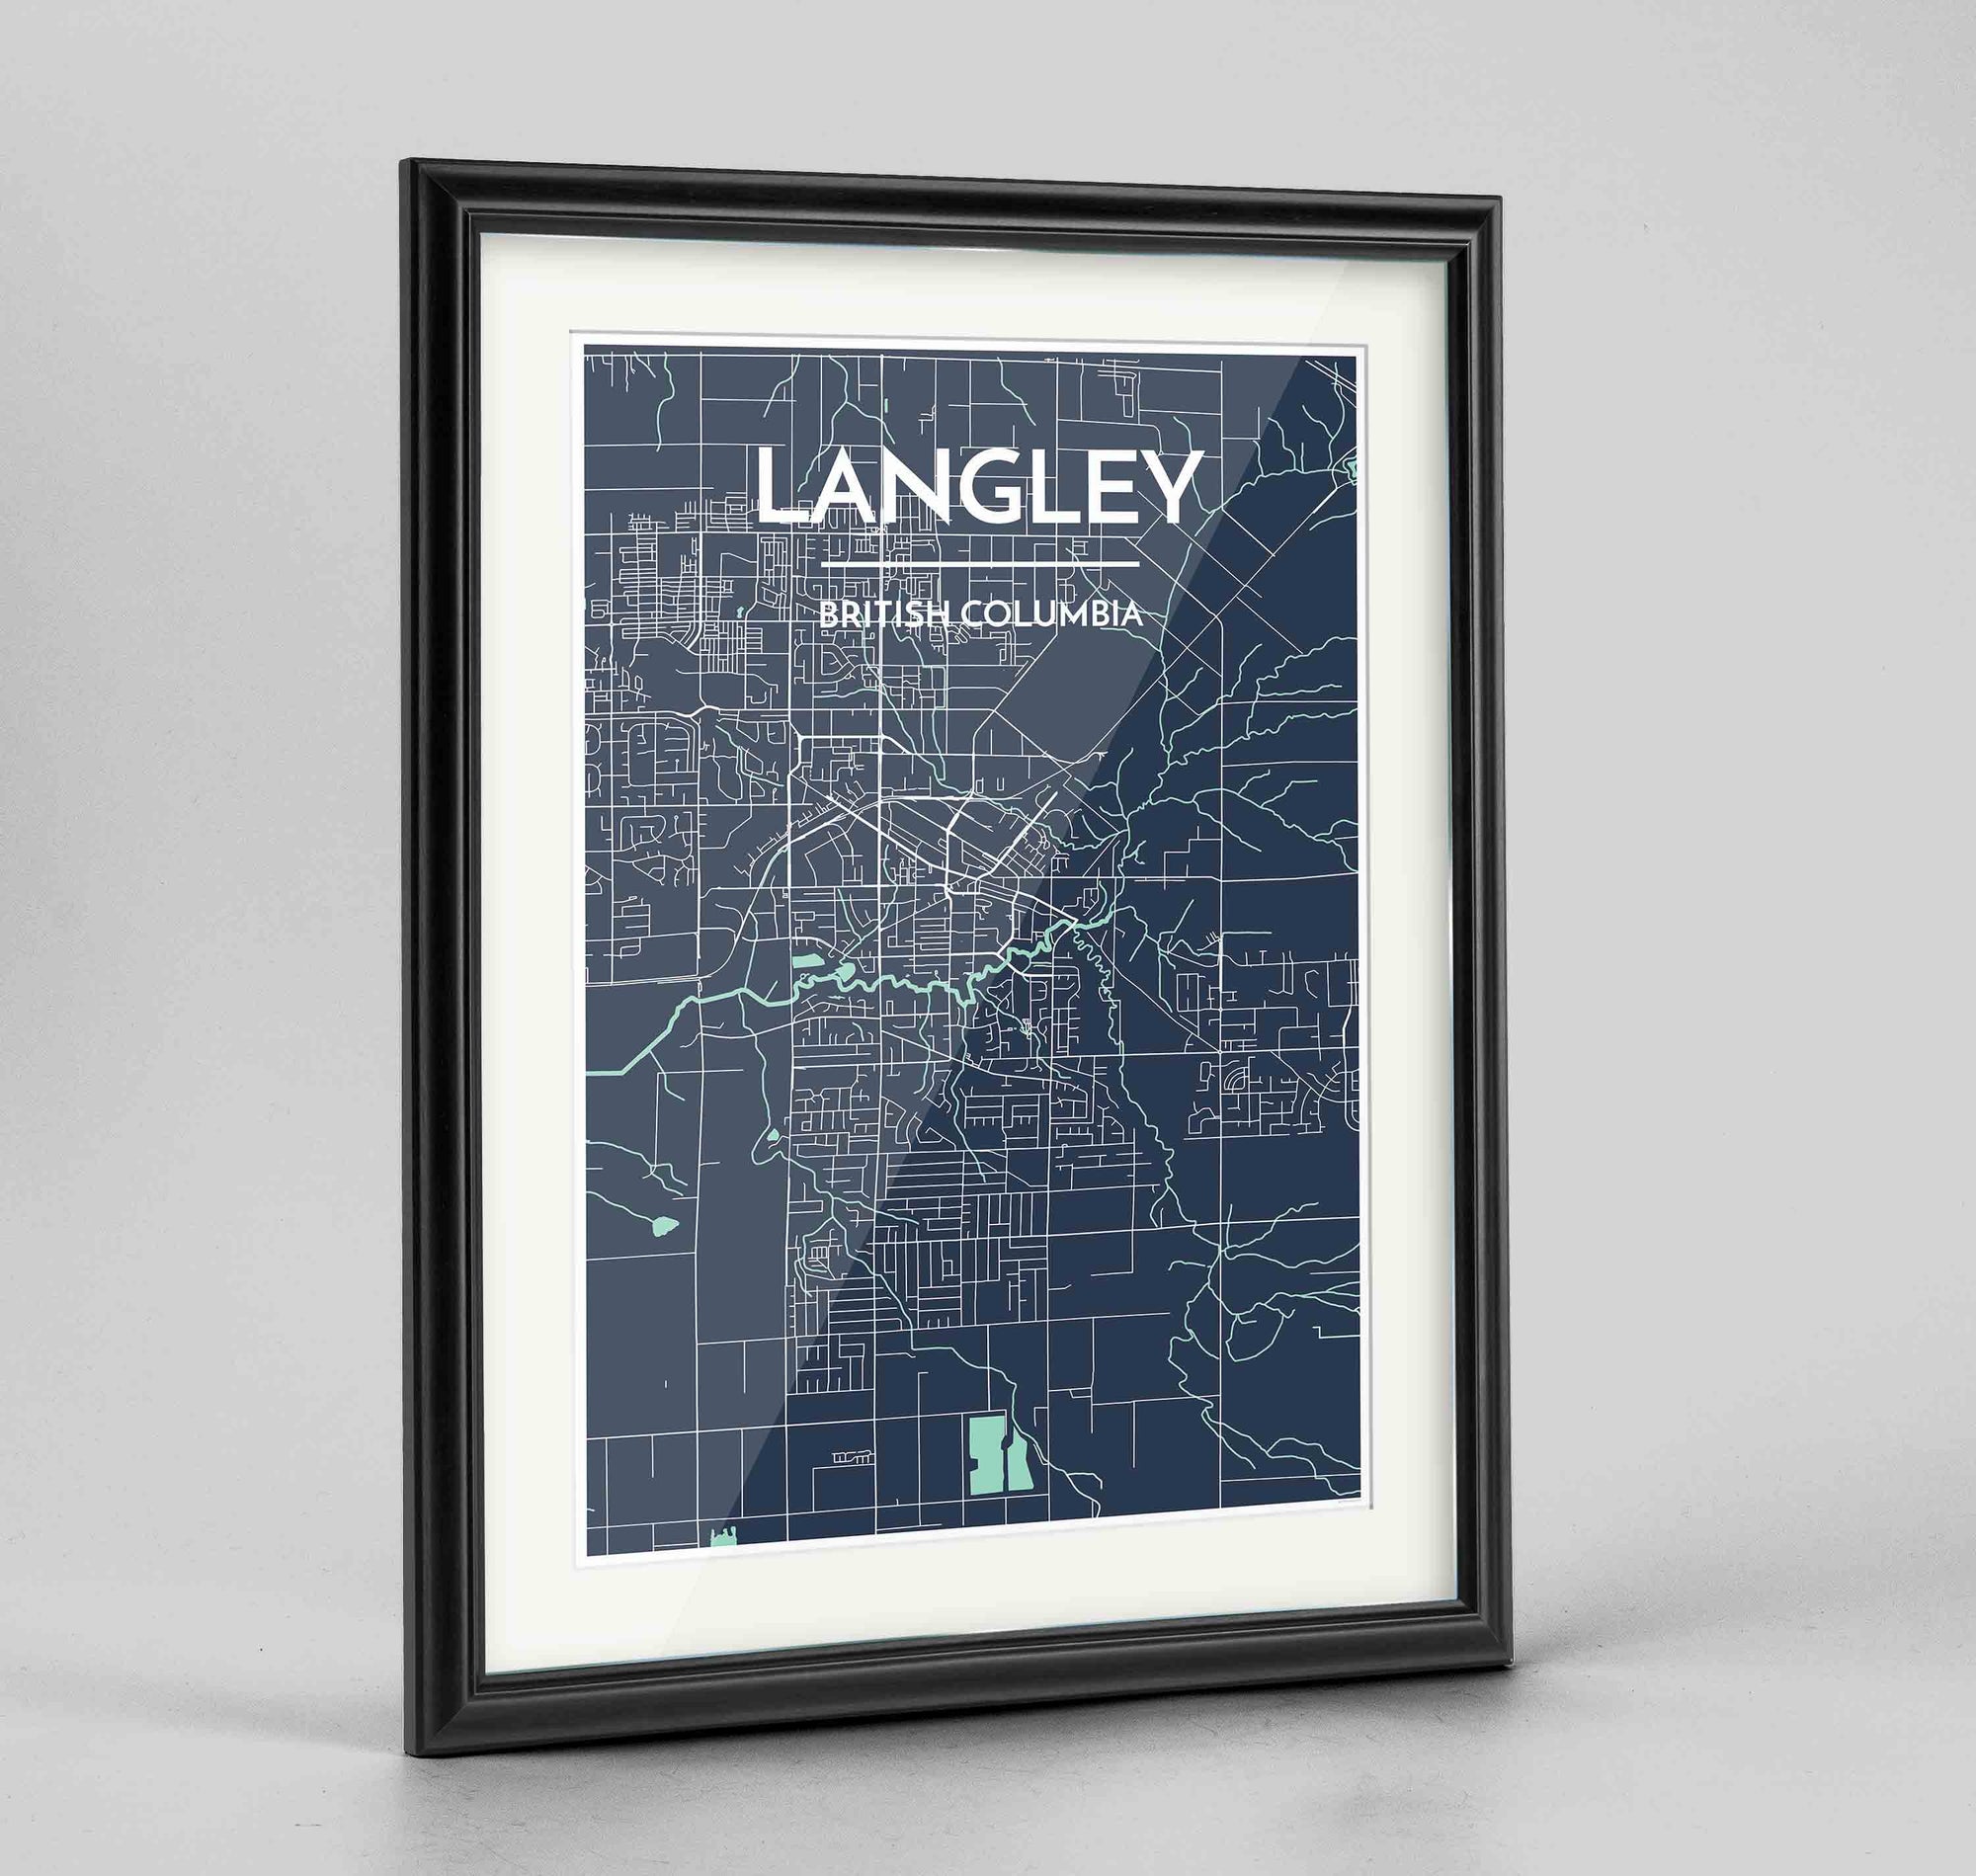 Framed Langley City Map 24x36" Traditional Black frame Point Two Design Group